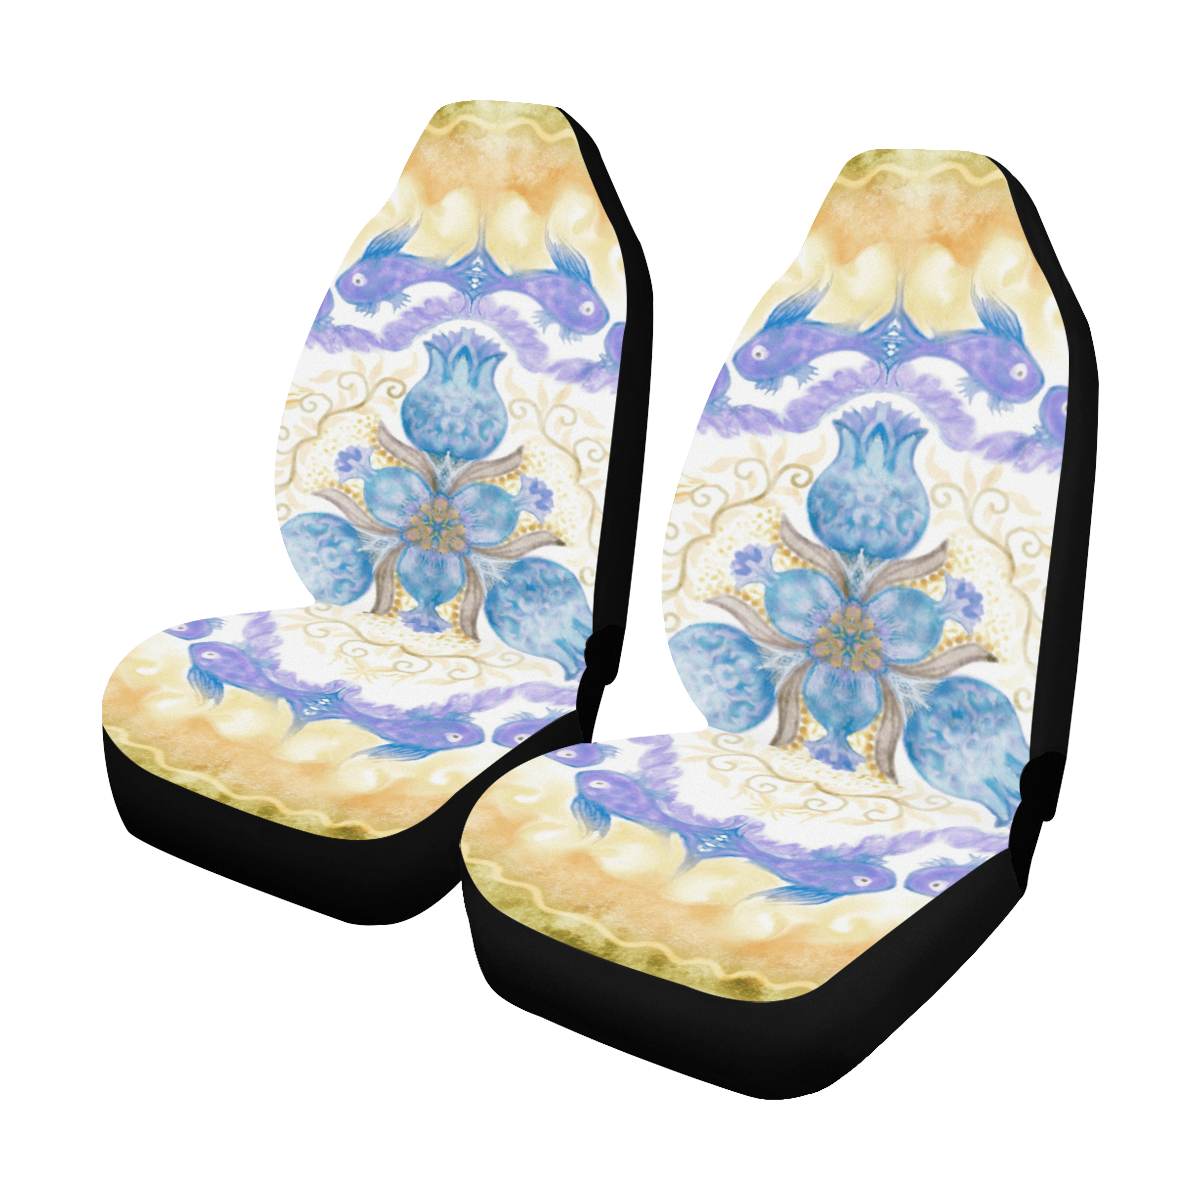 poissons et grenades 3 Car Seat Covers (Set of 2)